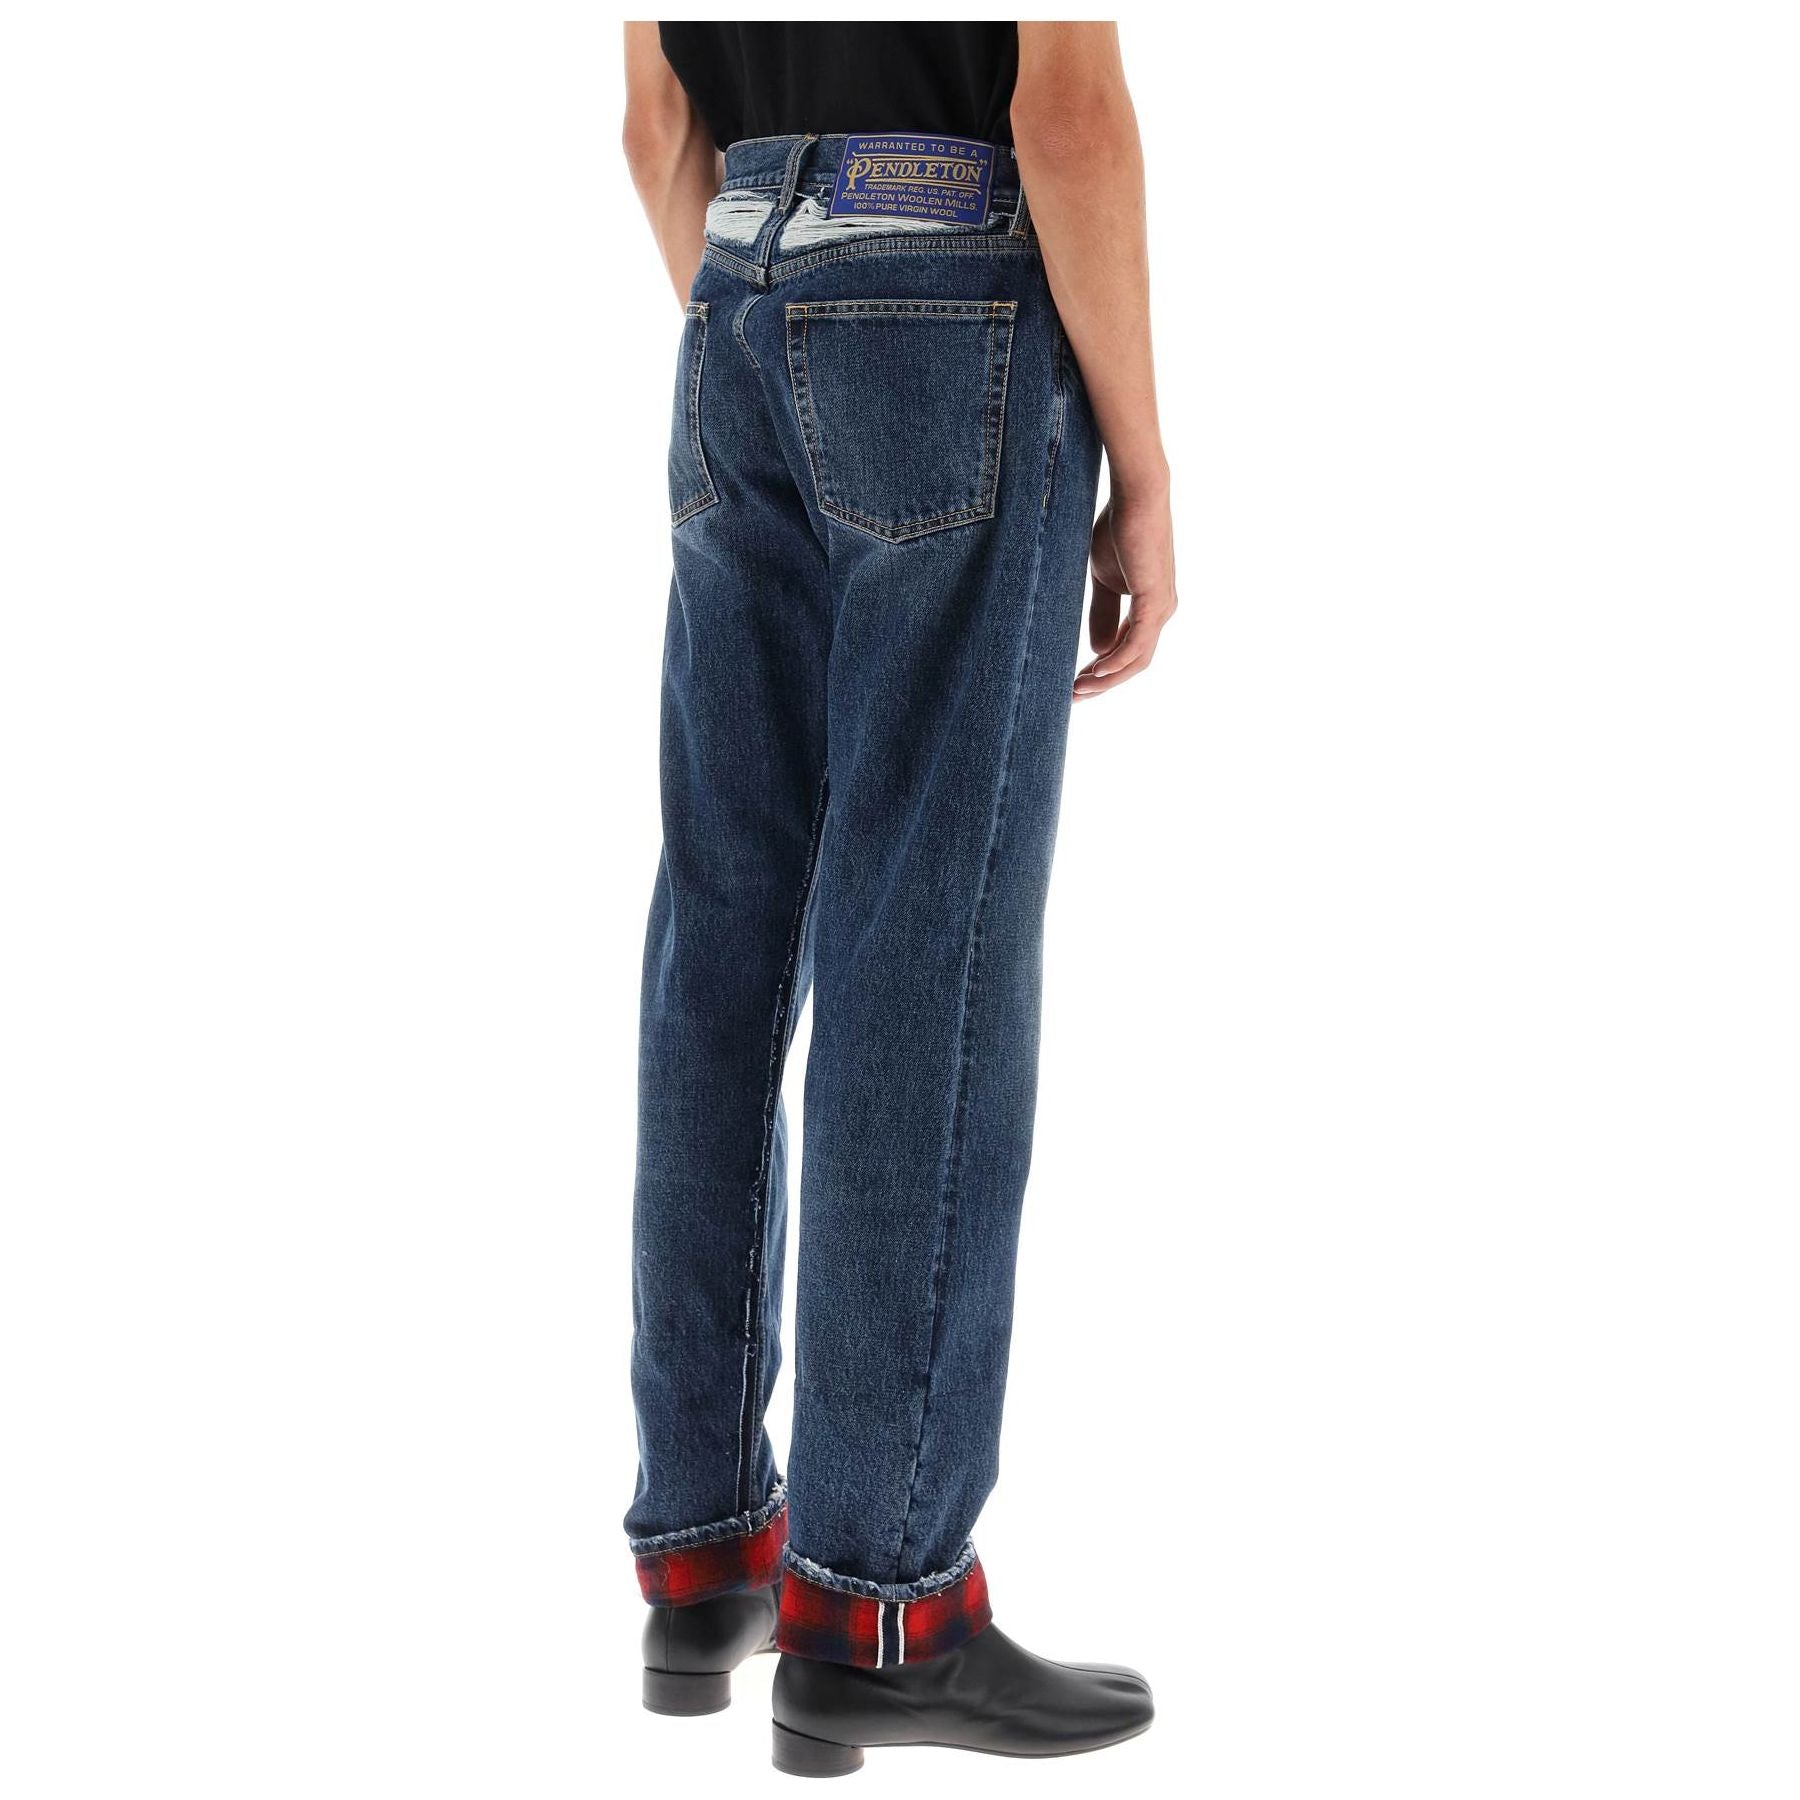 Pendleton Jeans With Inserts